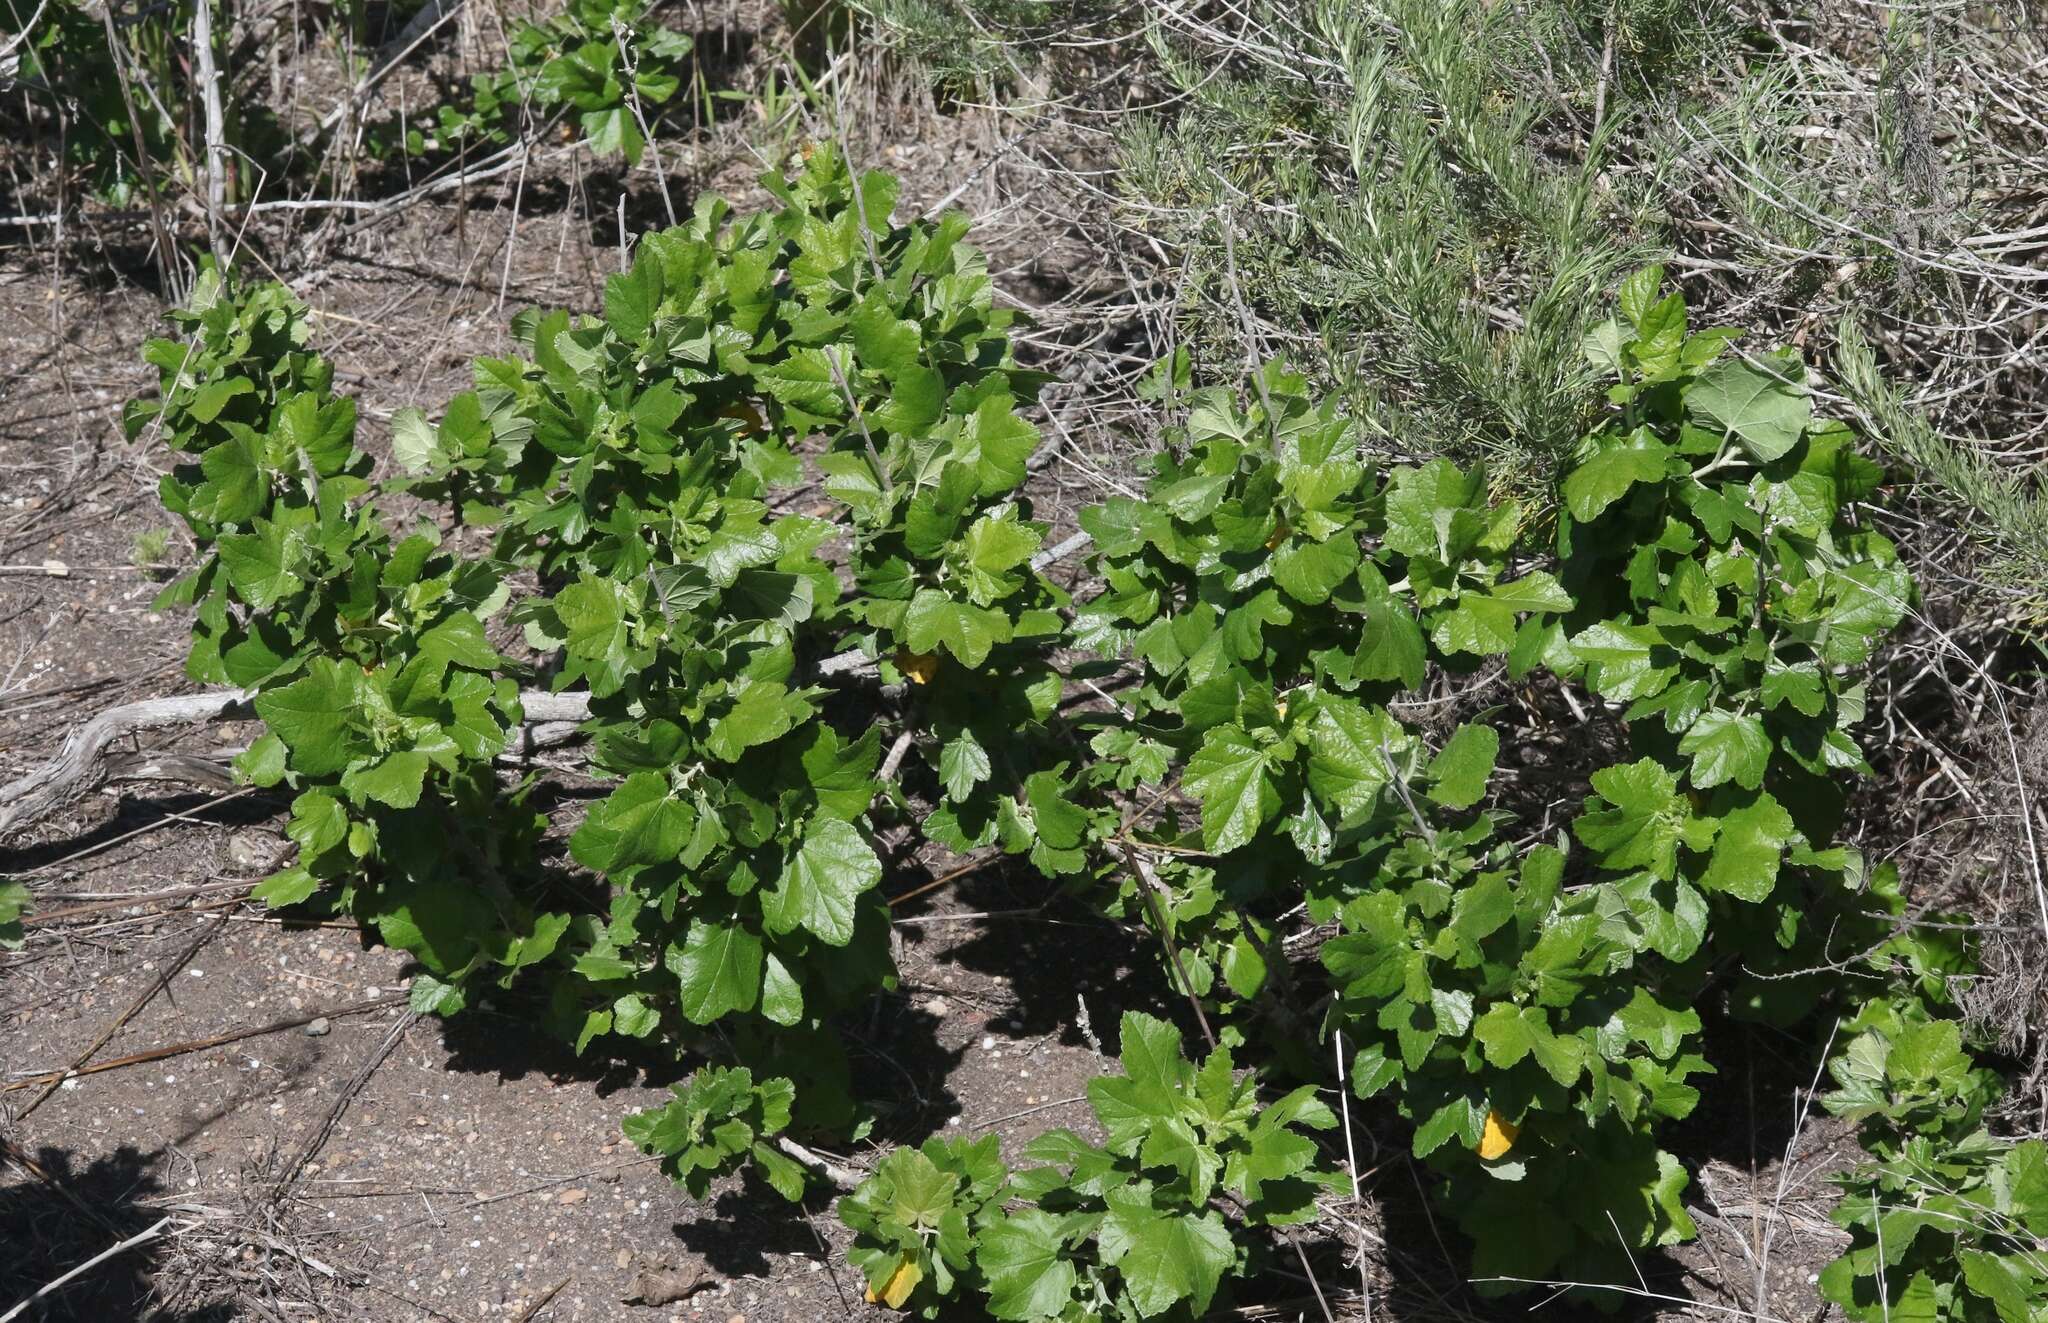 Image of Chaparral bushmallow